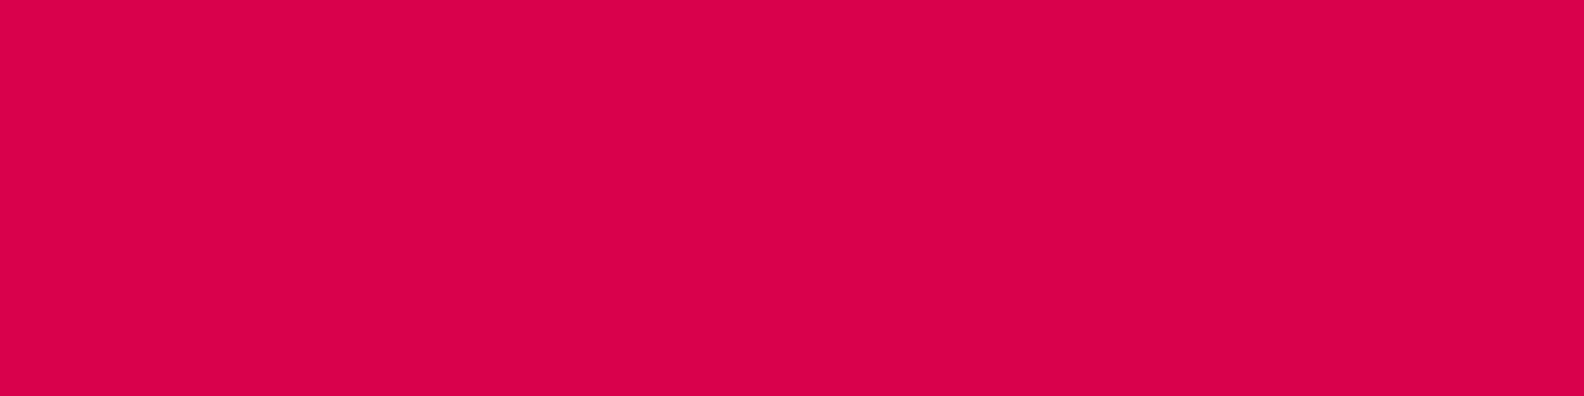 1584x396 UA Red Solid Color Background